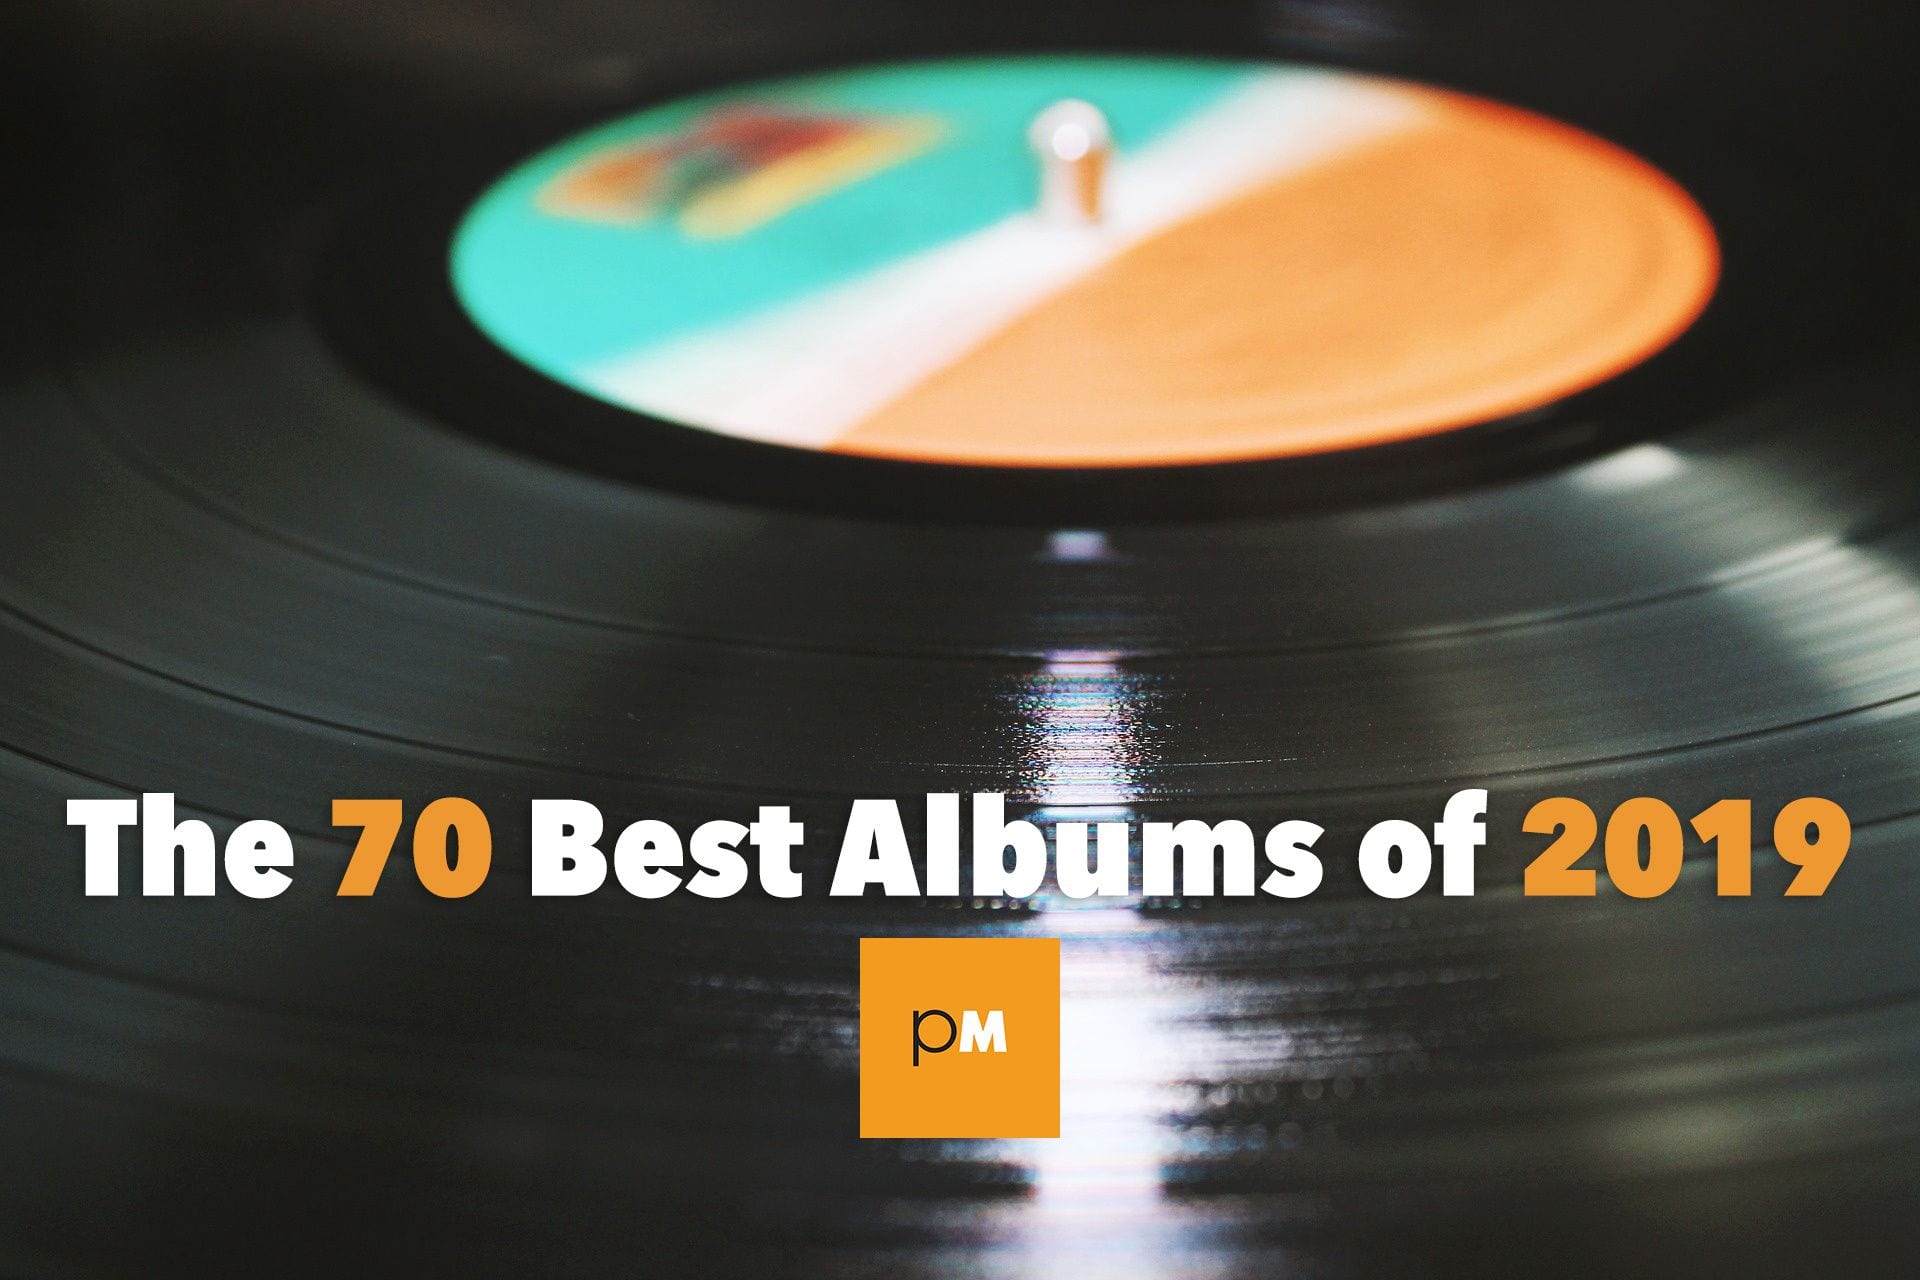 The 70 Best Albums of 2019